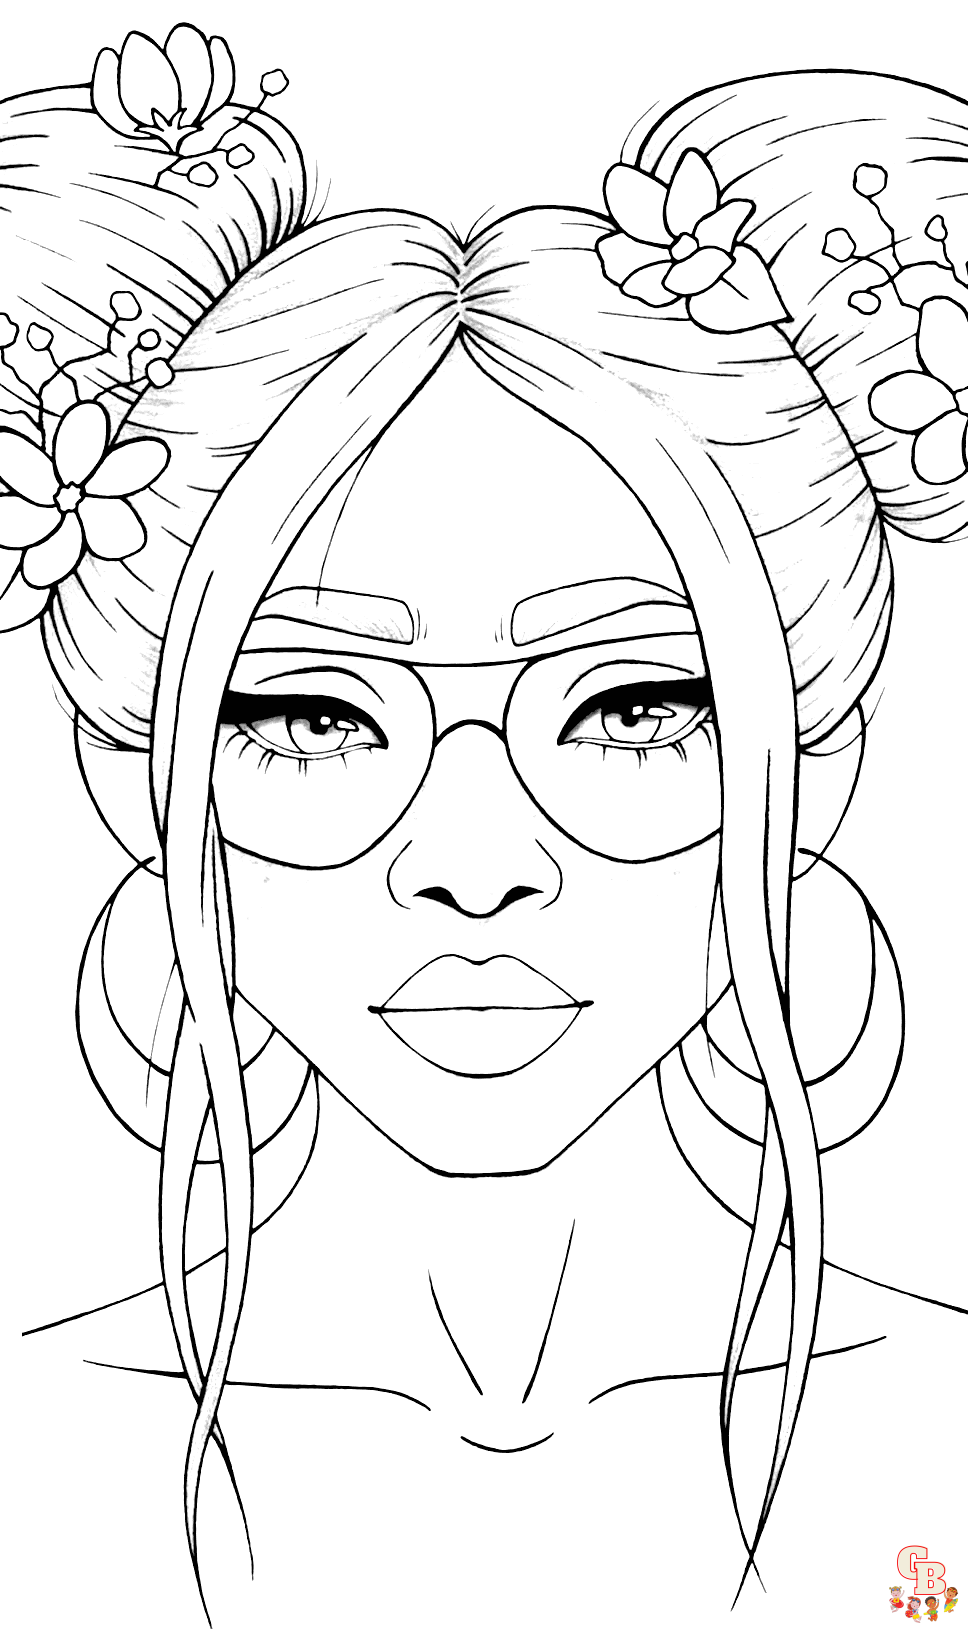 Printable people coloring sheets